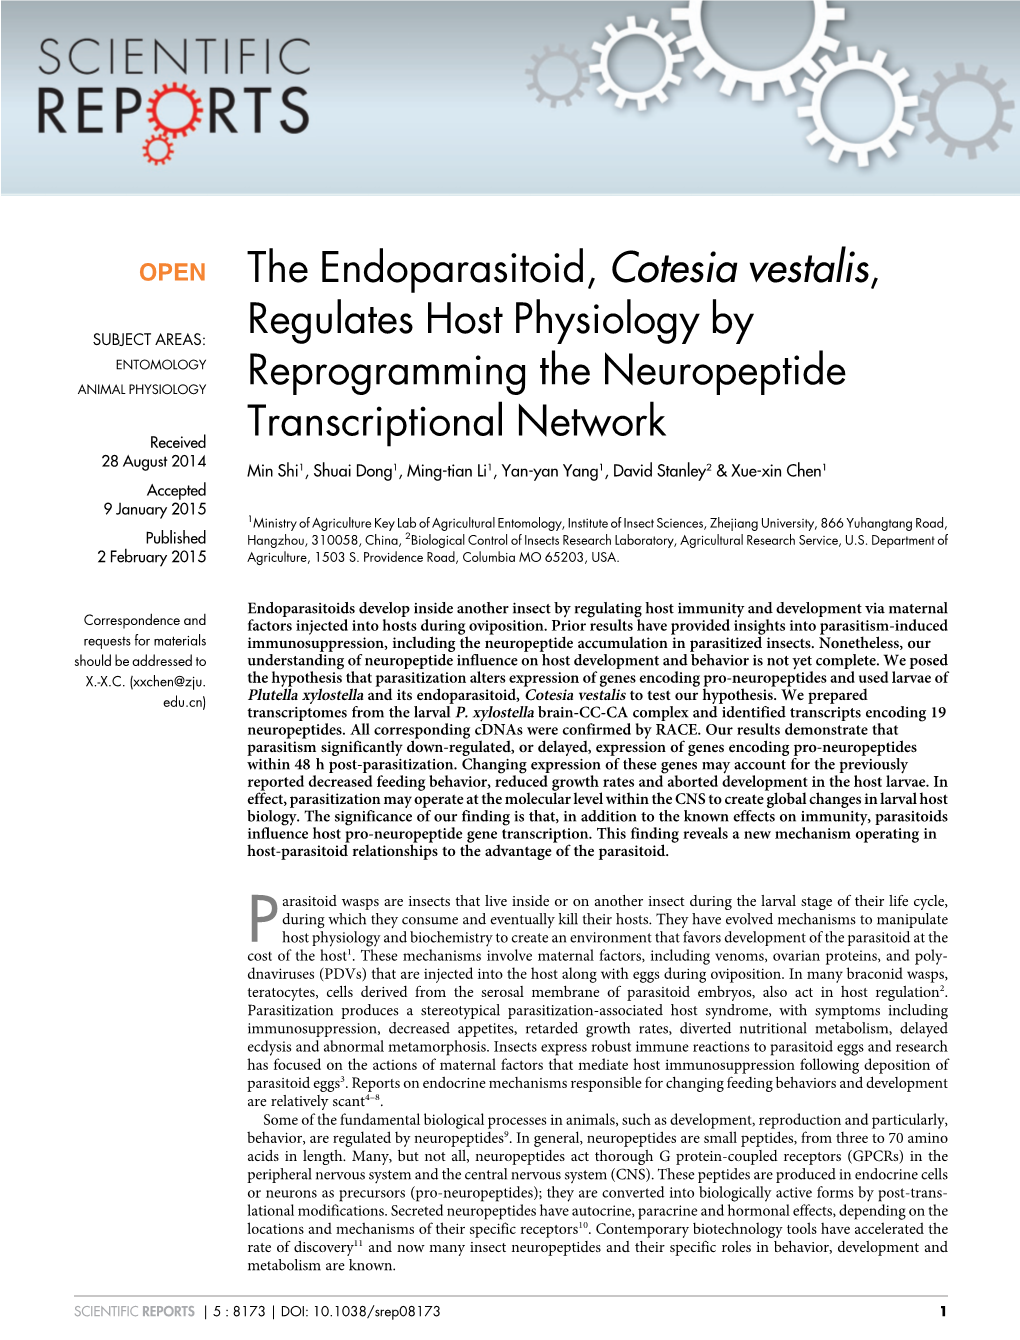 The Endoparasitoid, Cotesia Vestalis, Regulates Host Physiology by Reprogramming the Neuropeptide Transcriptional Network